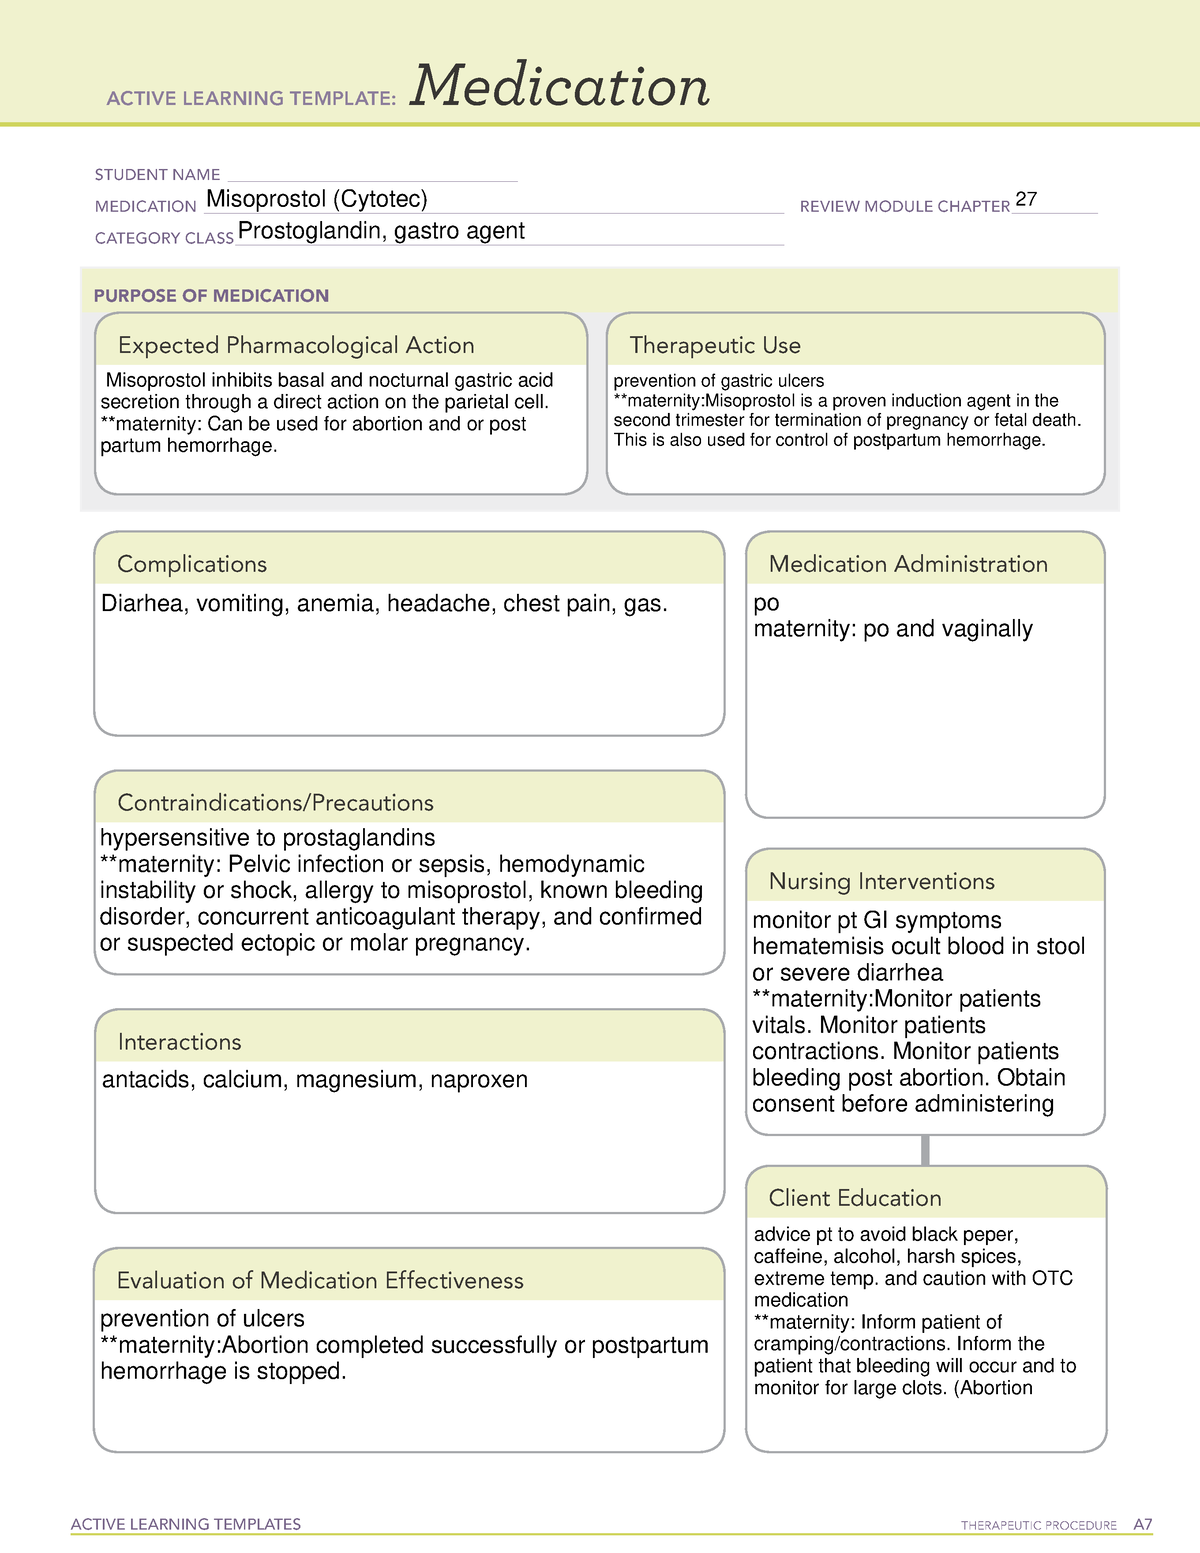 Misoprostol Medication Template - ACTIVE LEARNING TEMPLATES THERAPEUTIC ...